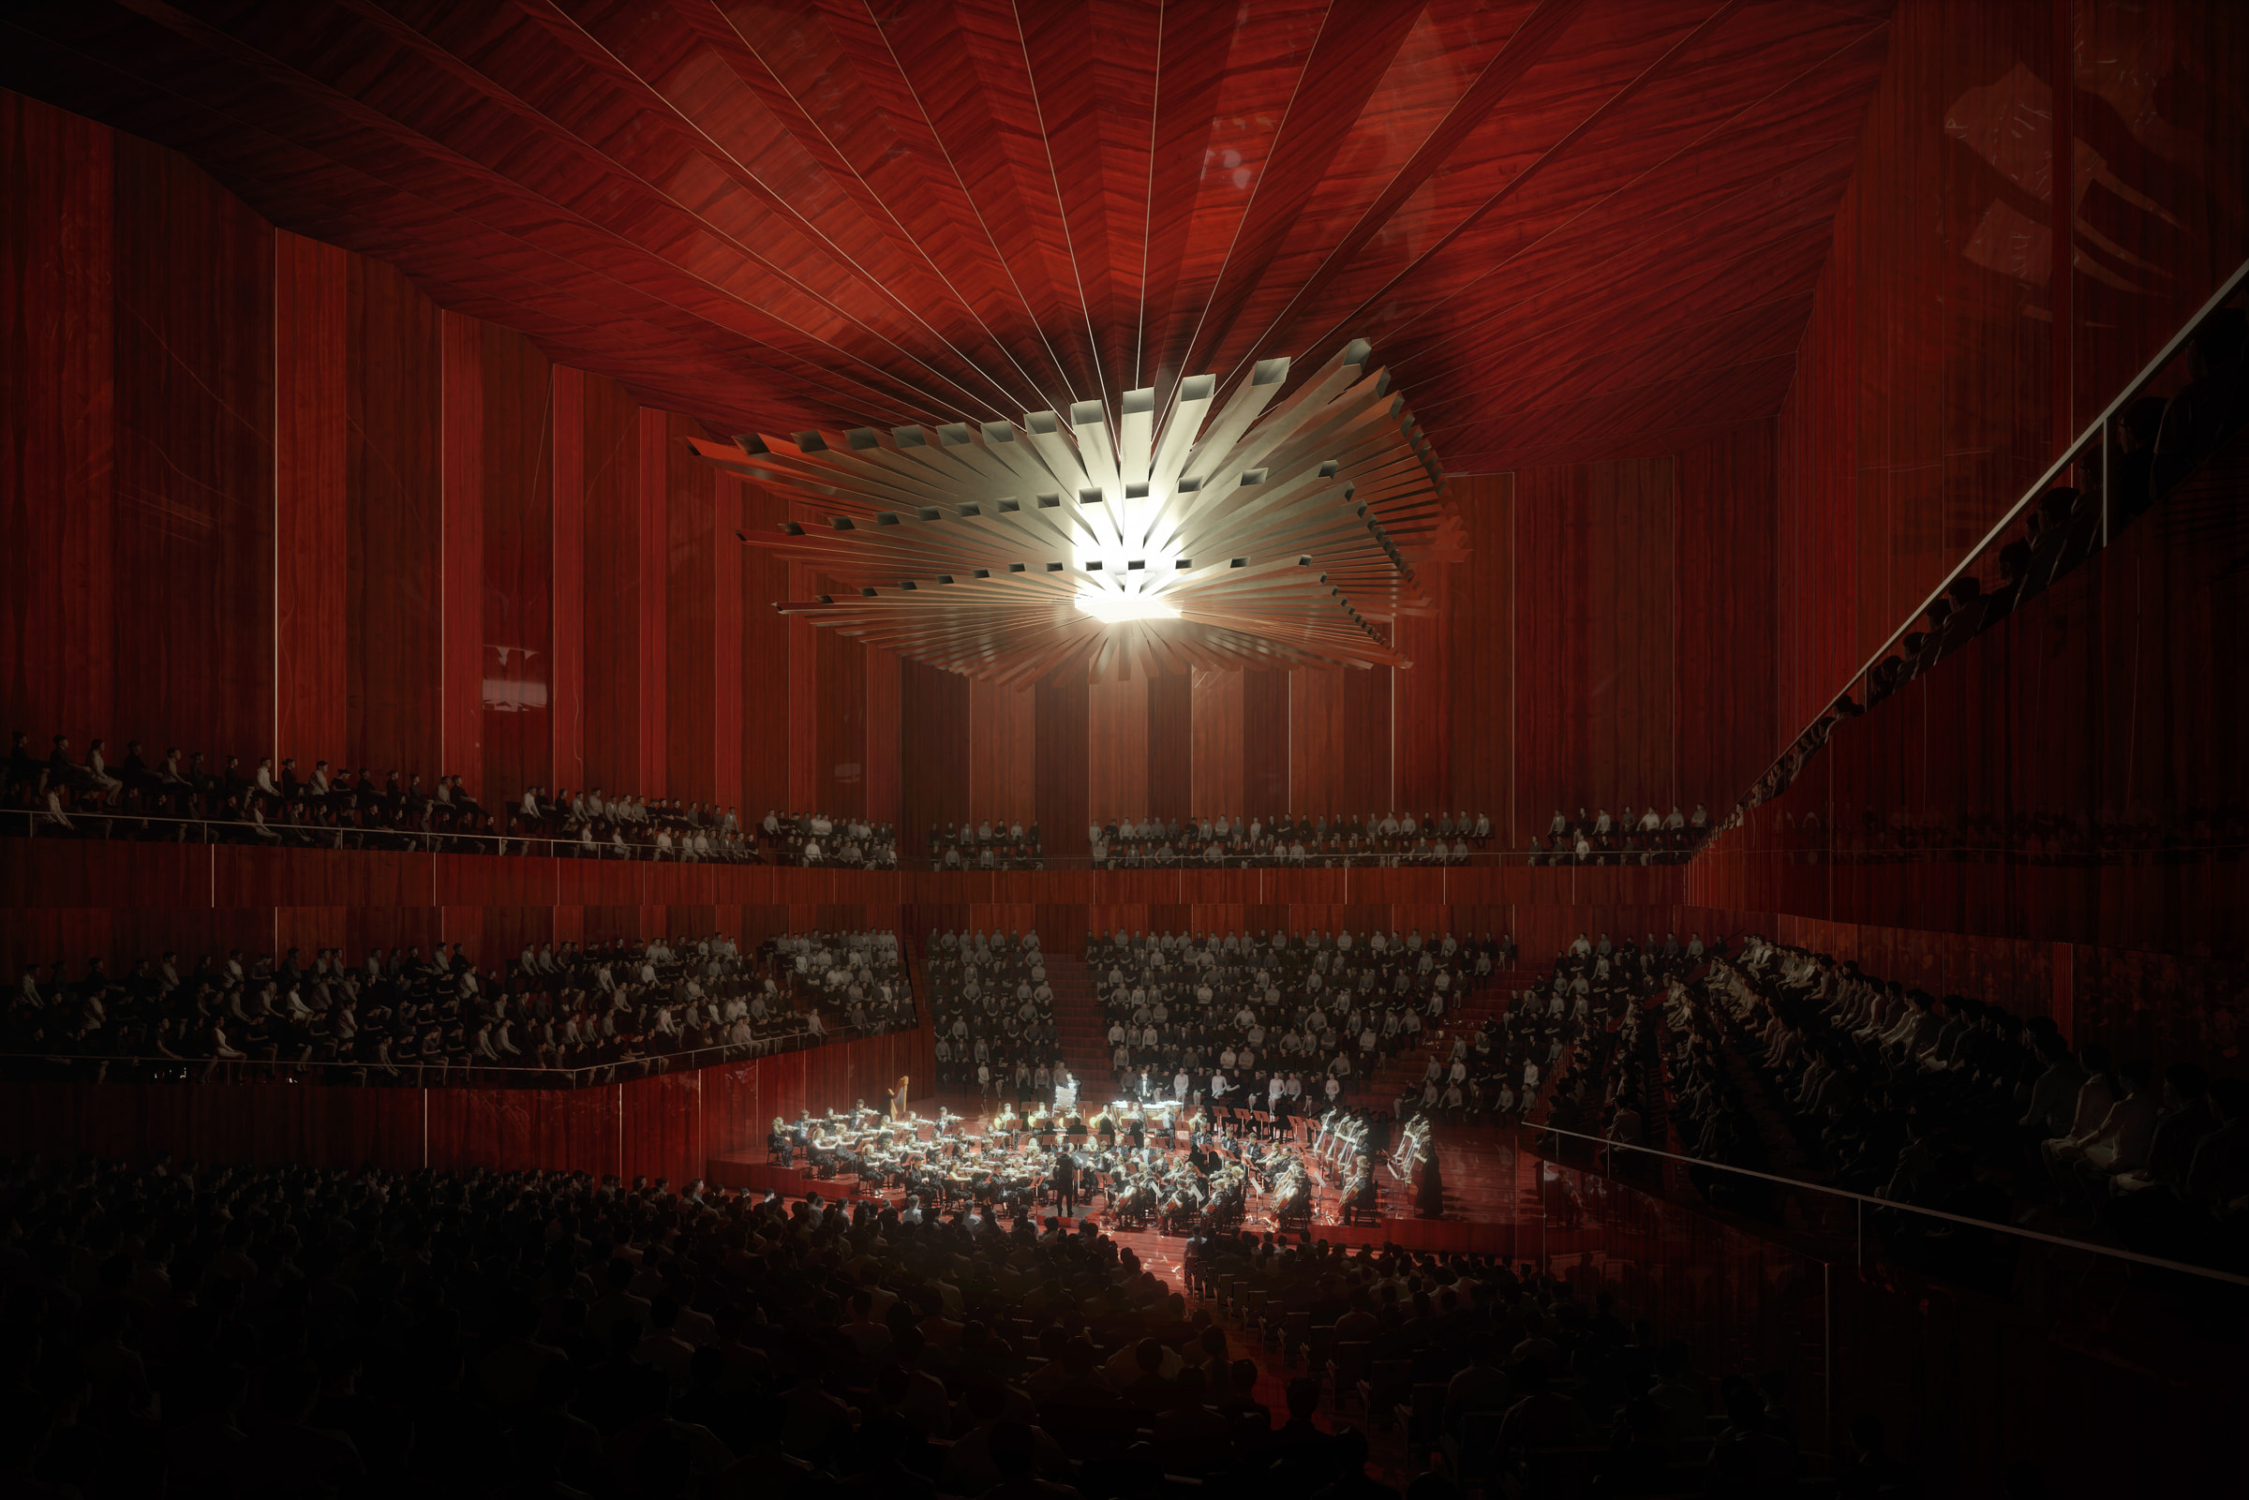 A visualization of the Shenzhen Opera House Concert Hall interior.